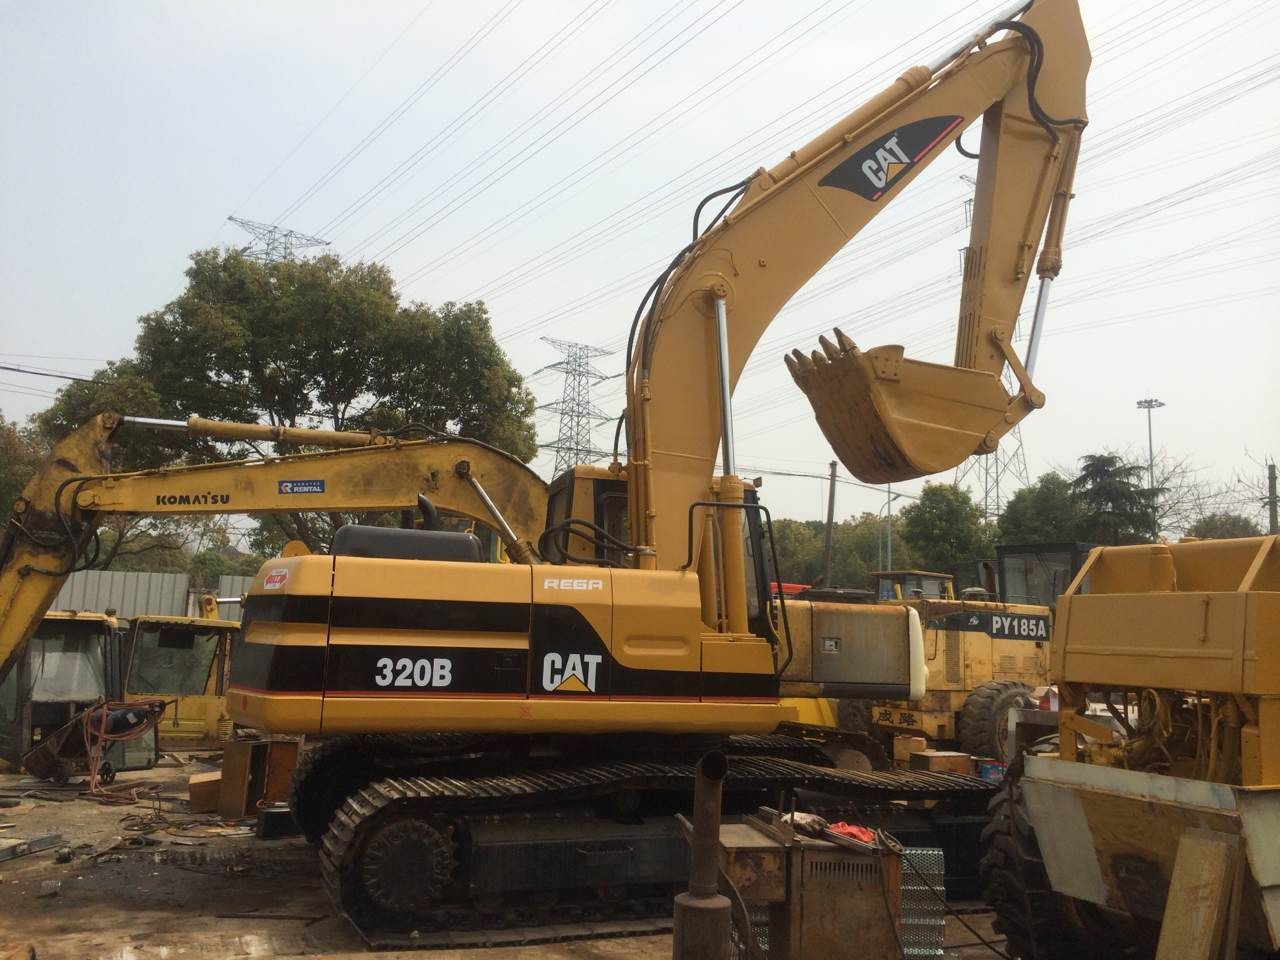 307b used excavator for sale track excavator 307c in usa second hand digger